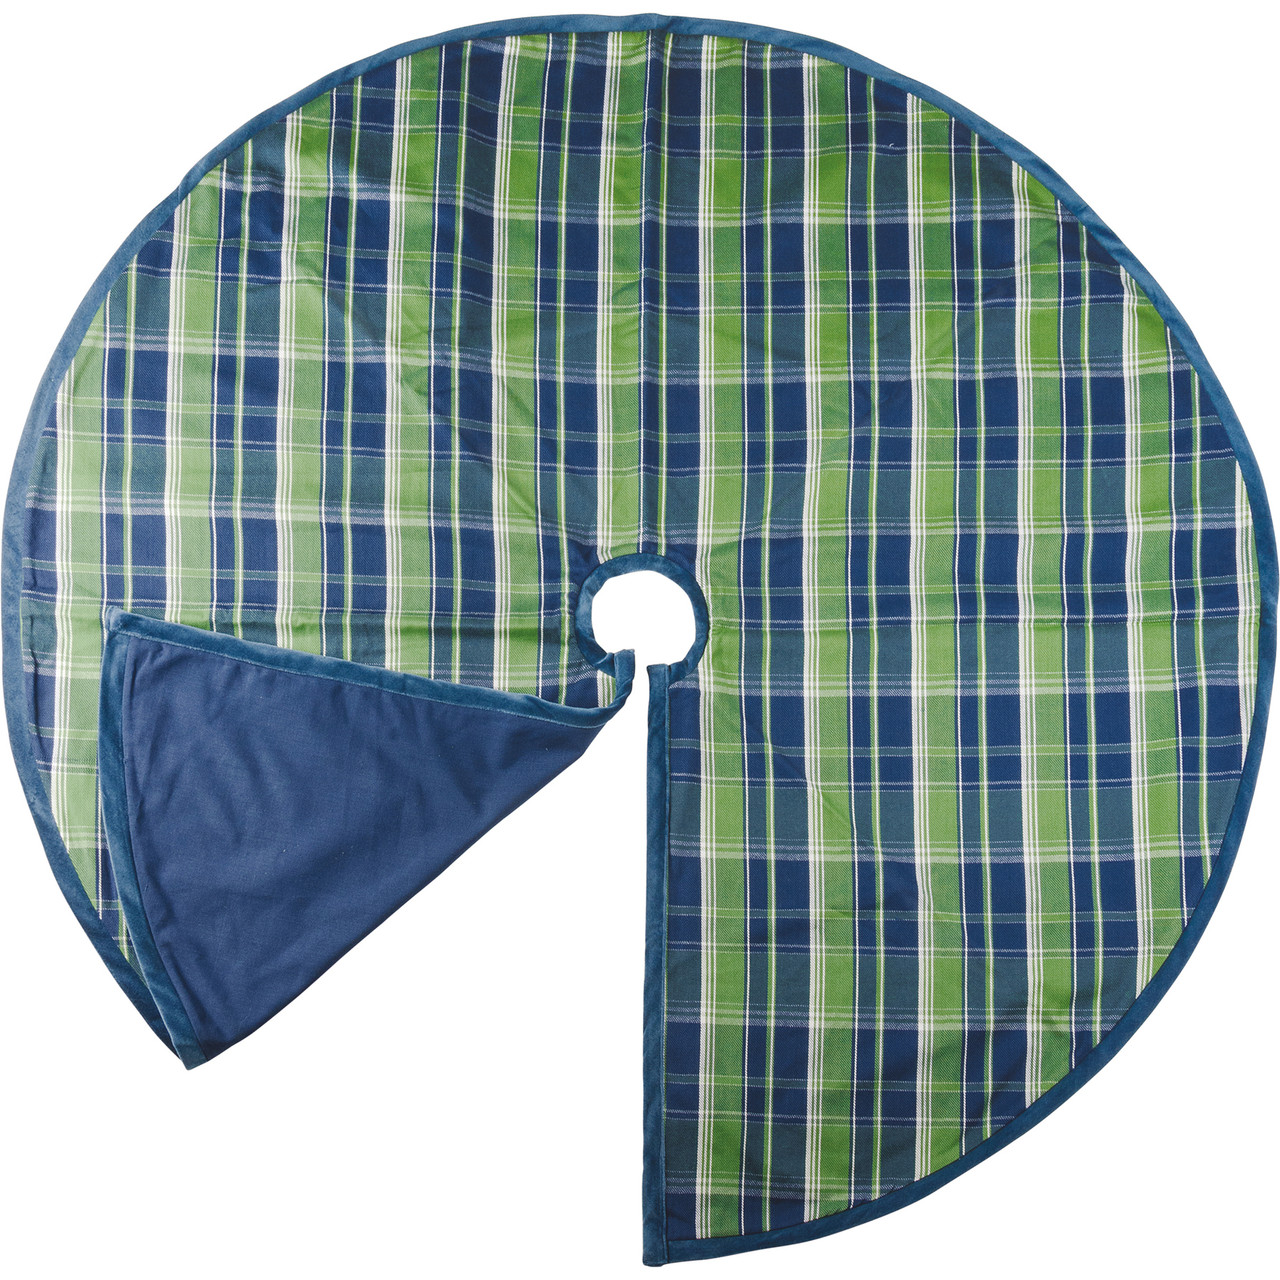 Large Christmas Tree Skirt - Green & Blue Plaid Design 52 Inch Diameter  from Primitives by Kathy - Cherryland Sales